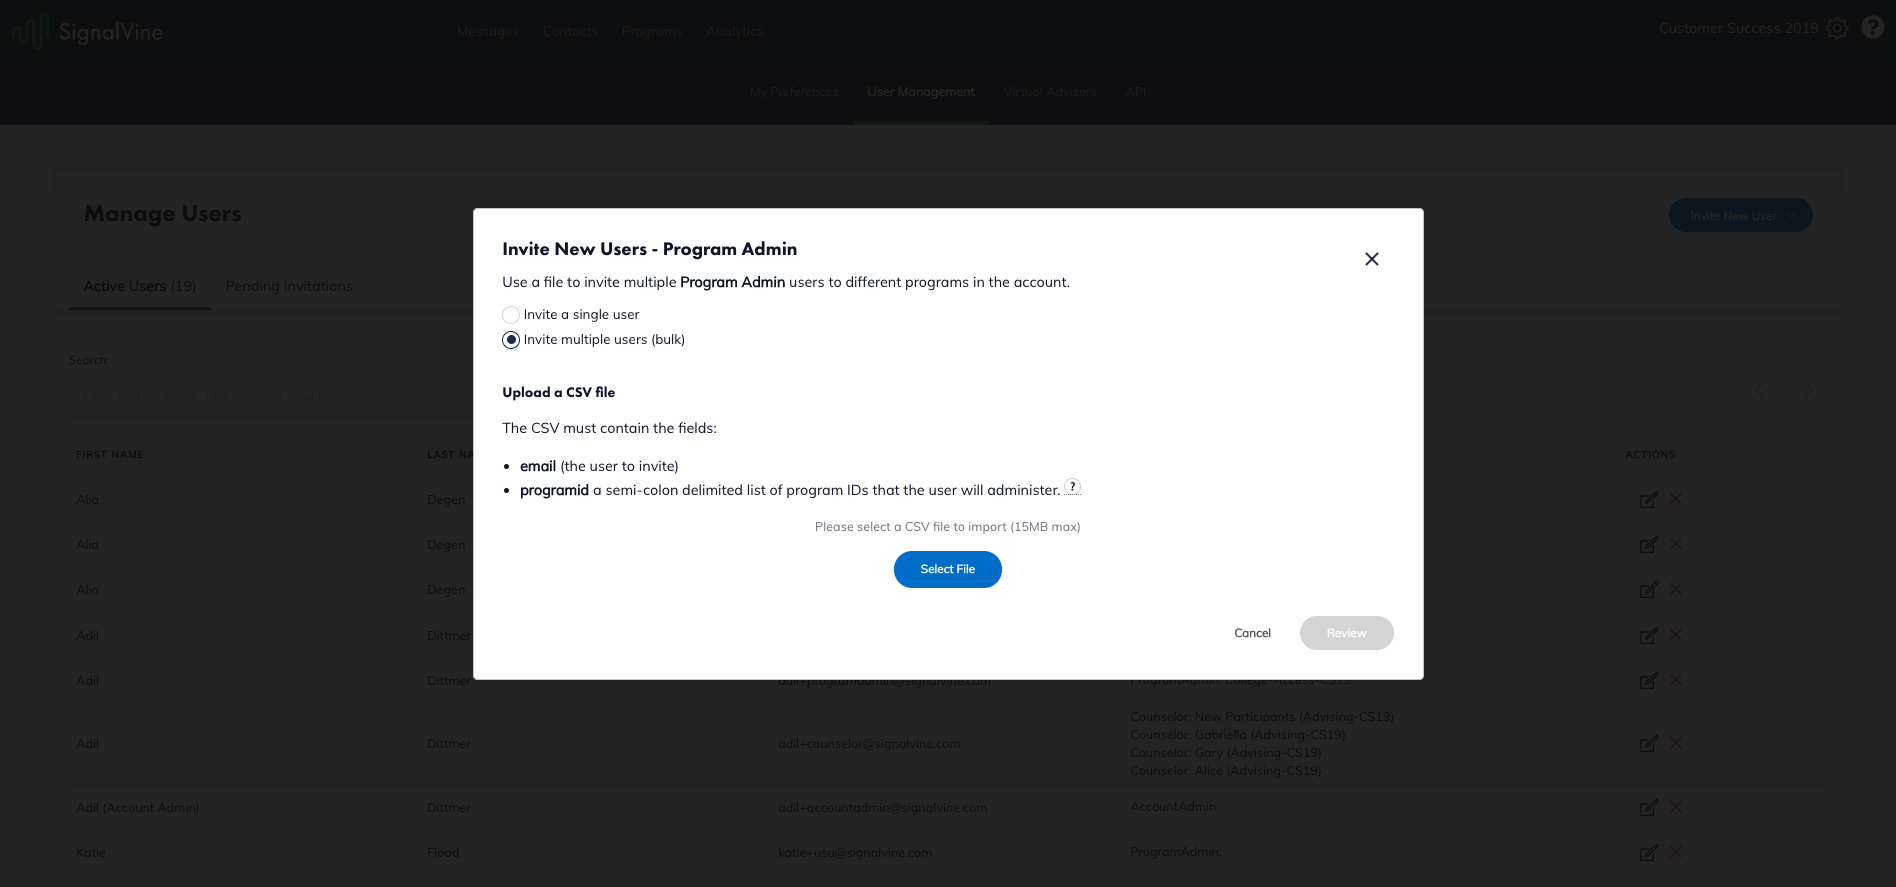 Image of the Invite New Users - Program Admin pop-up, with Invite multiple users (bulk) selected